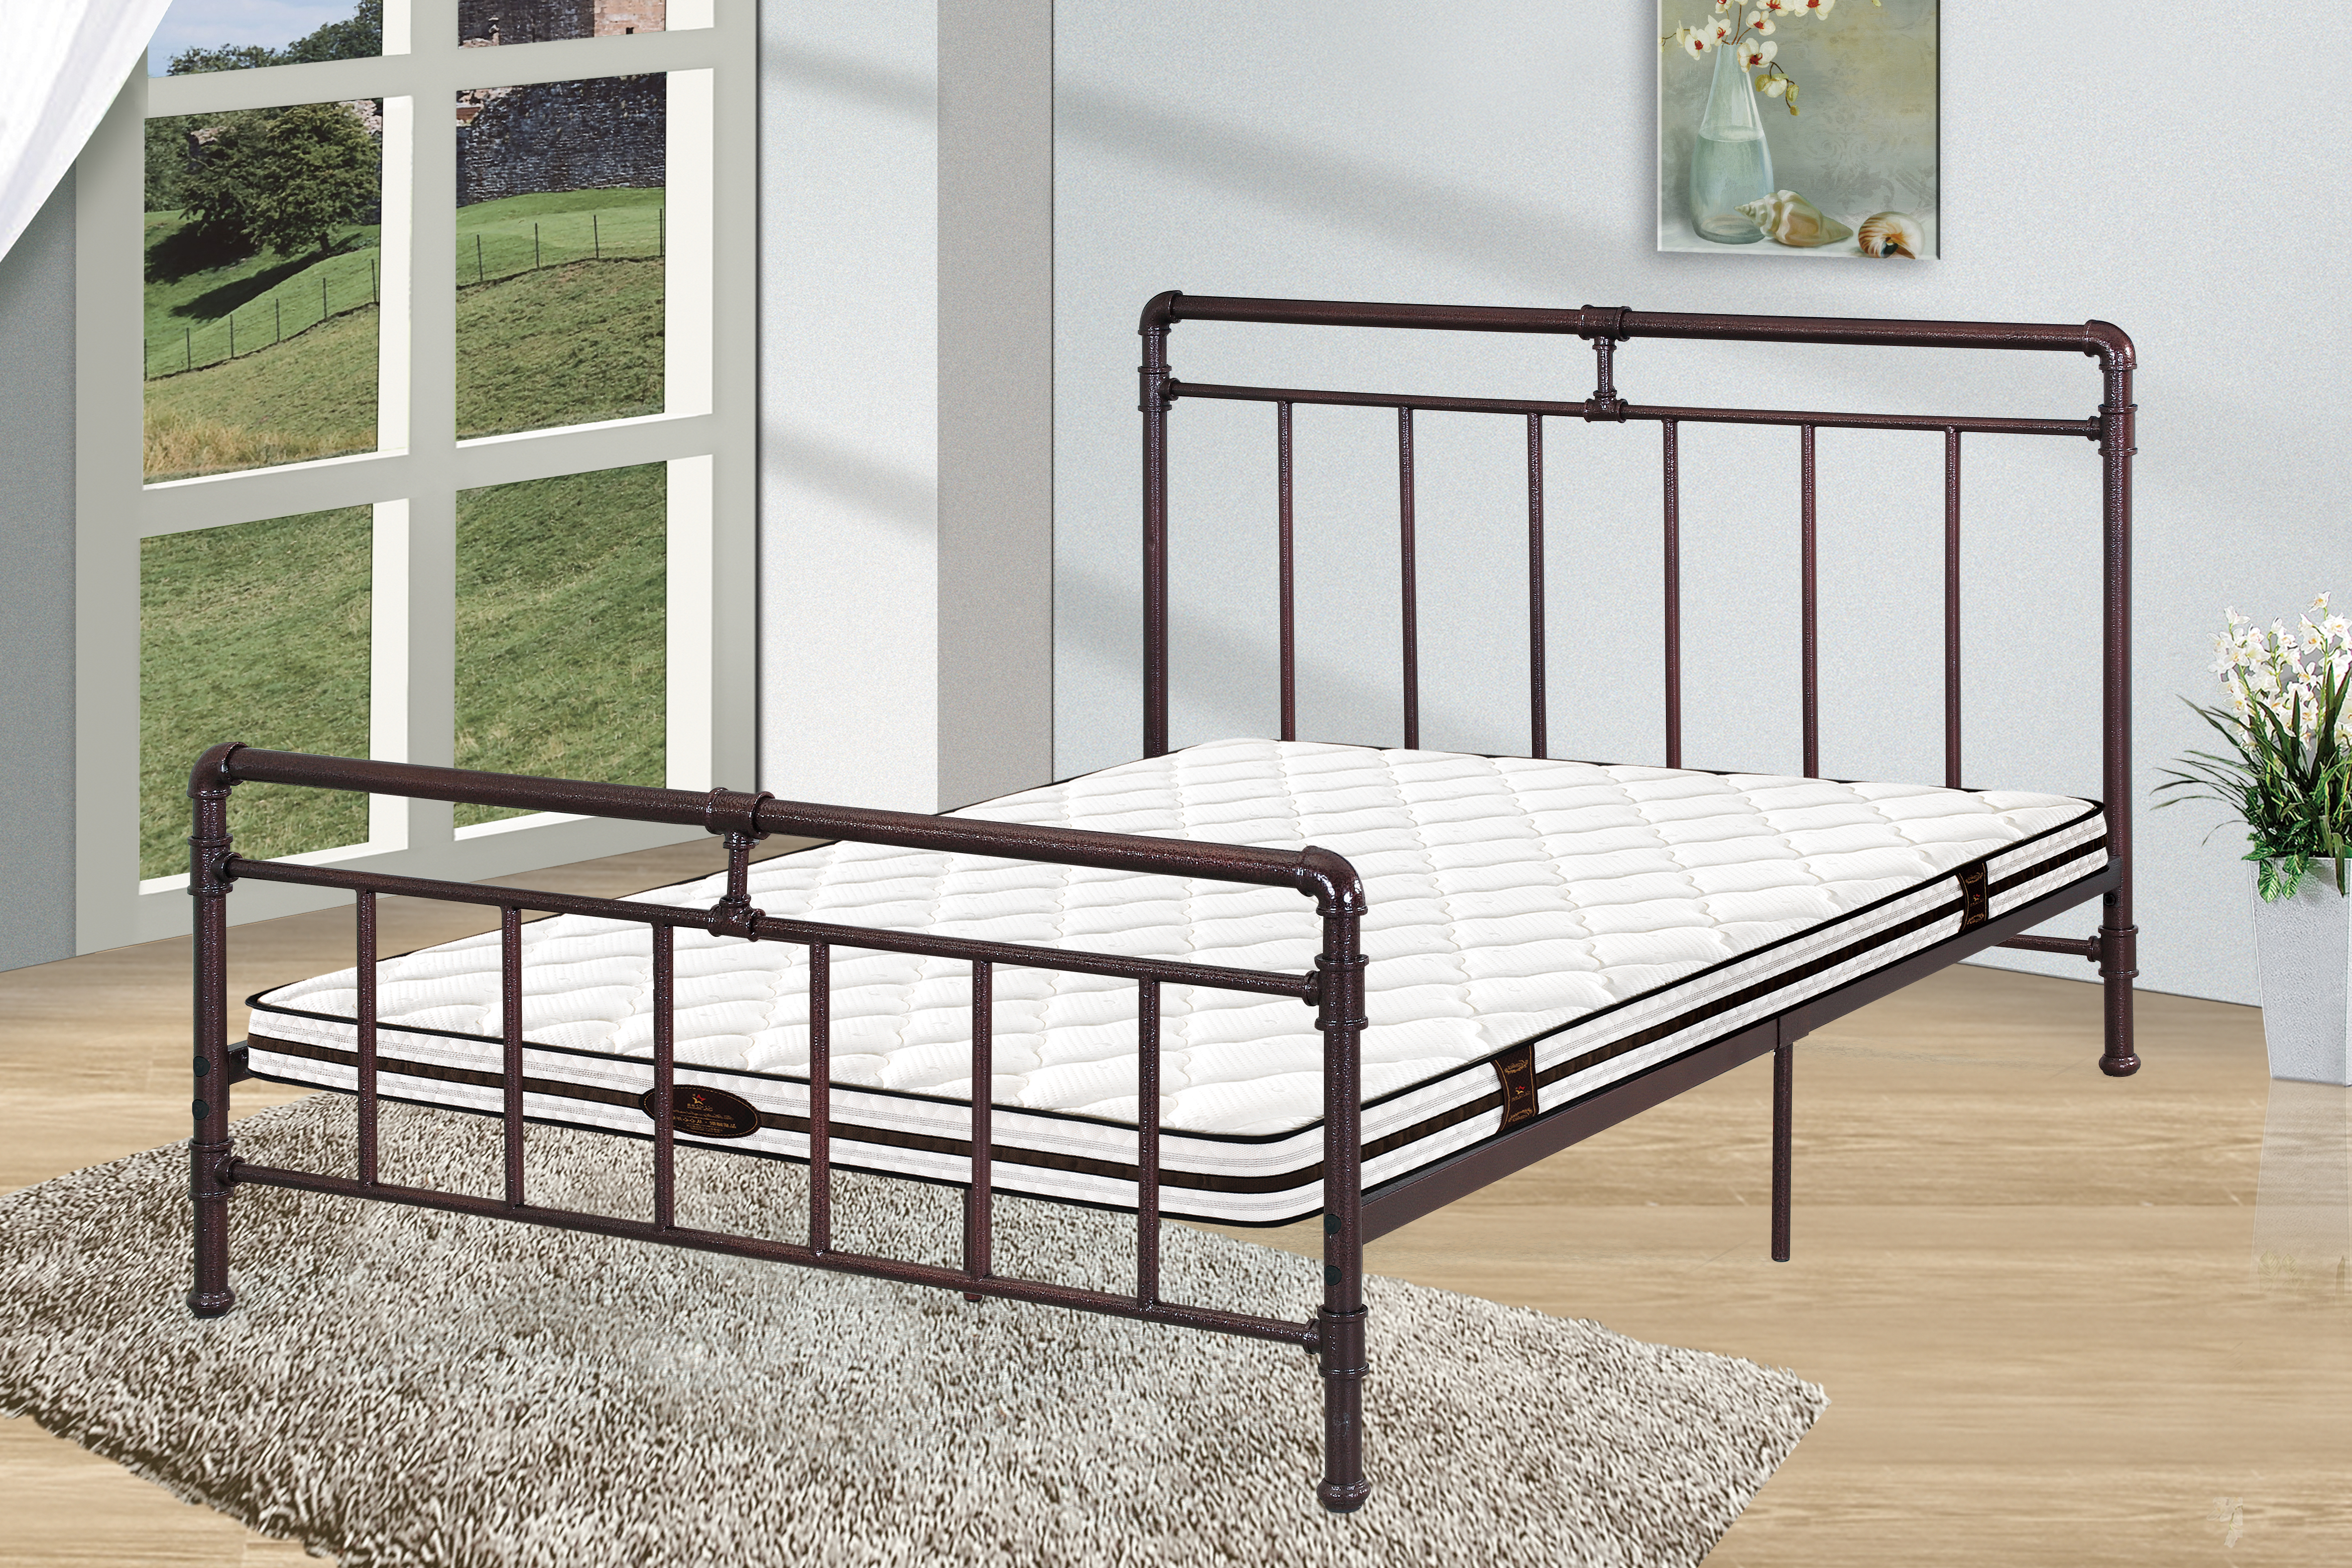 BD-5016 metal bed Featured Image